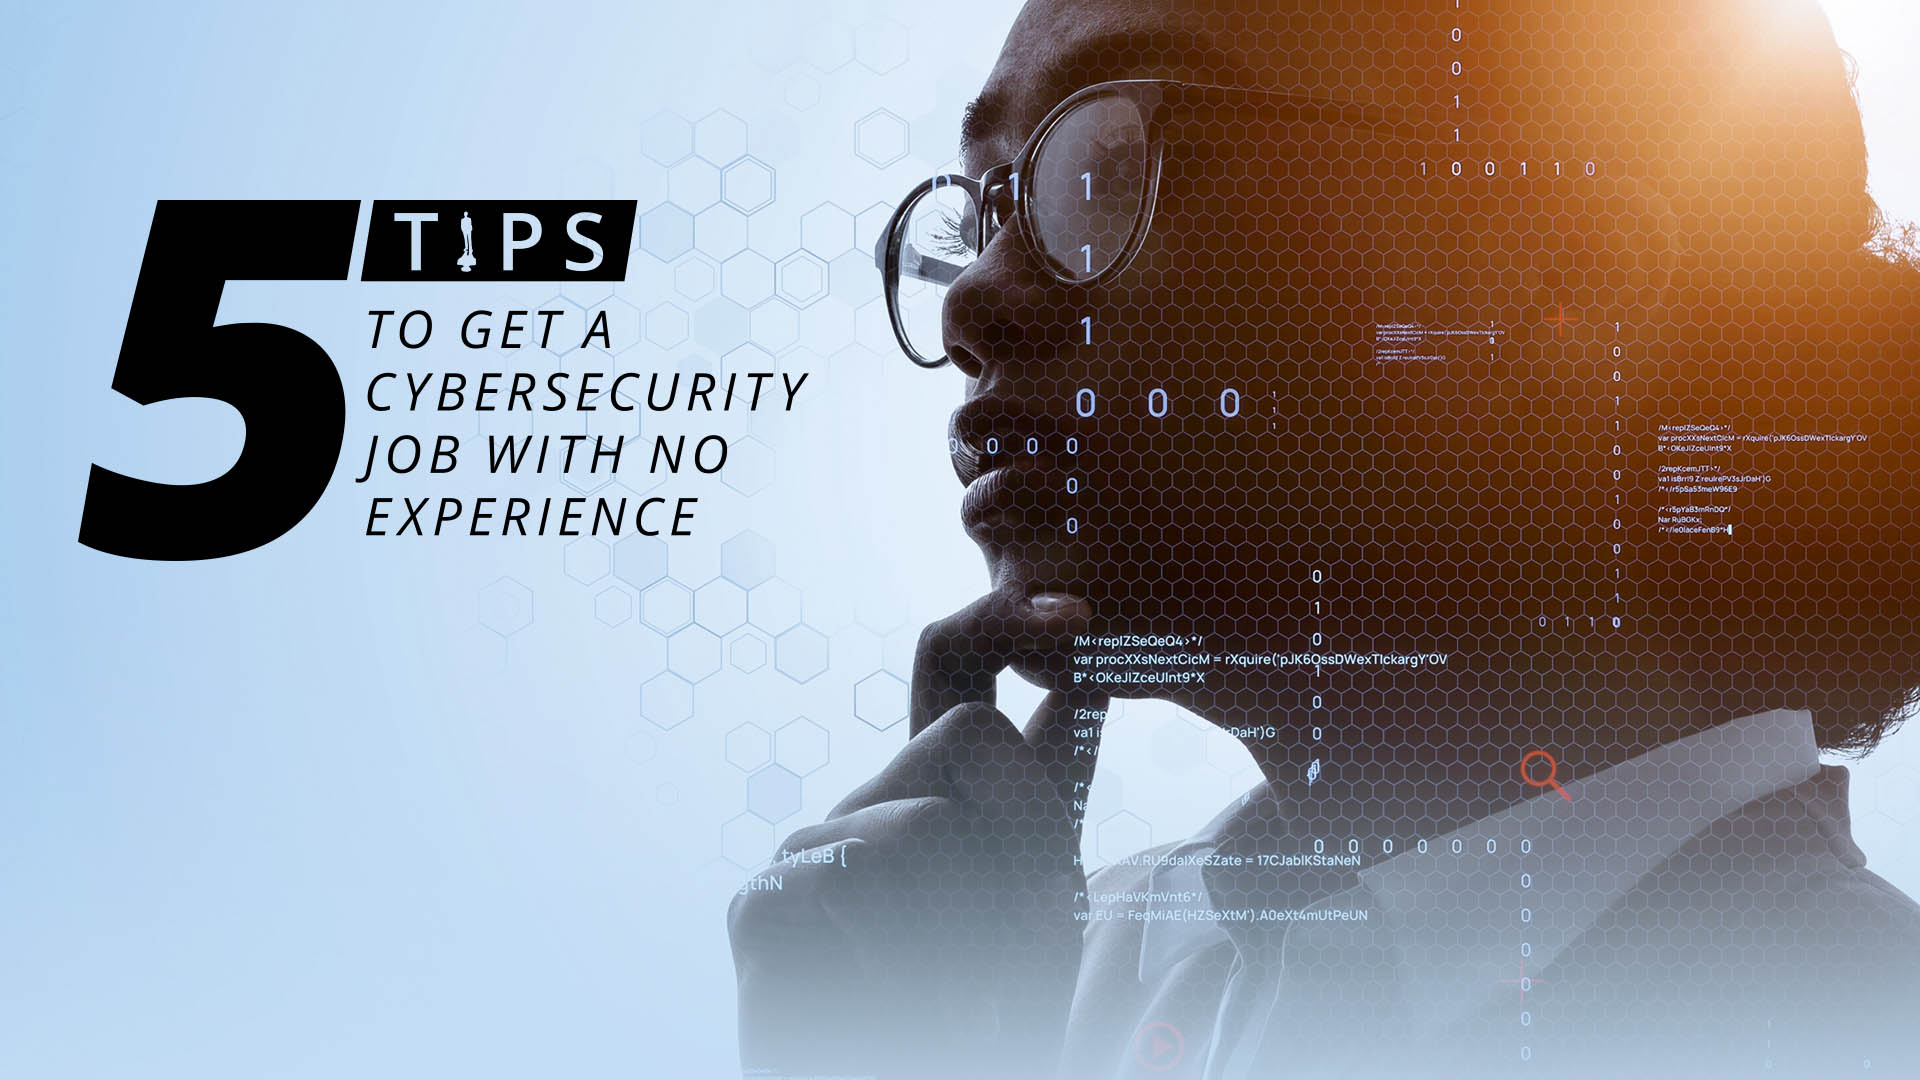 5 Tips to Get a Cybersecurity Job With No Experience